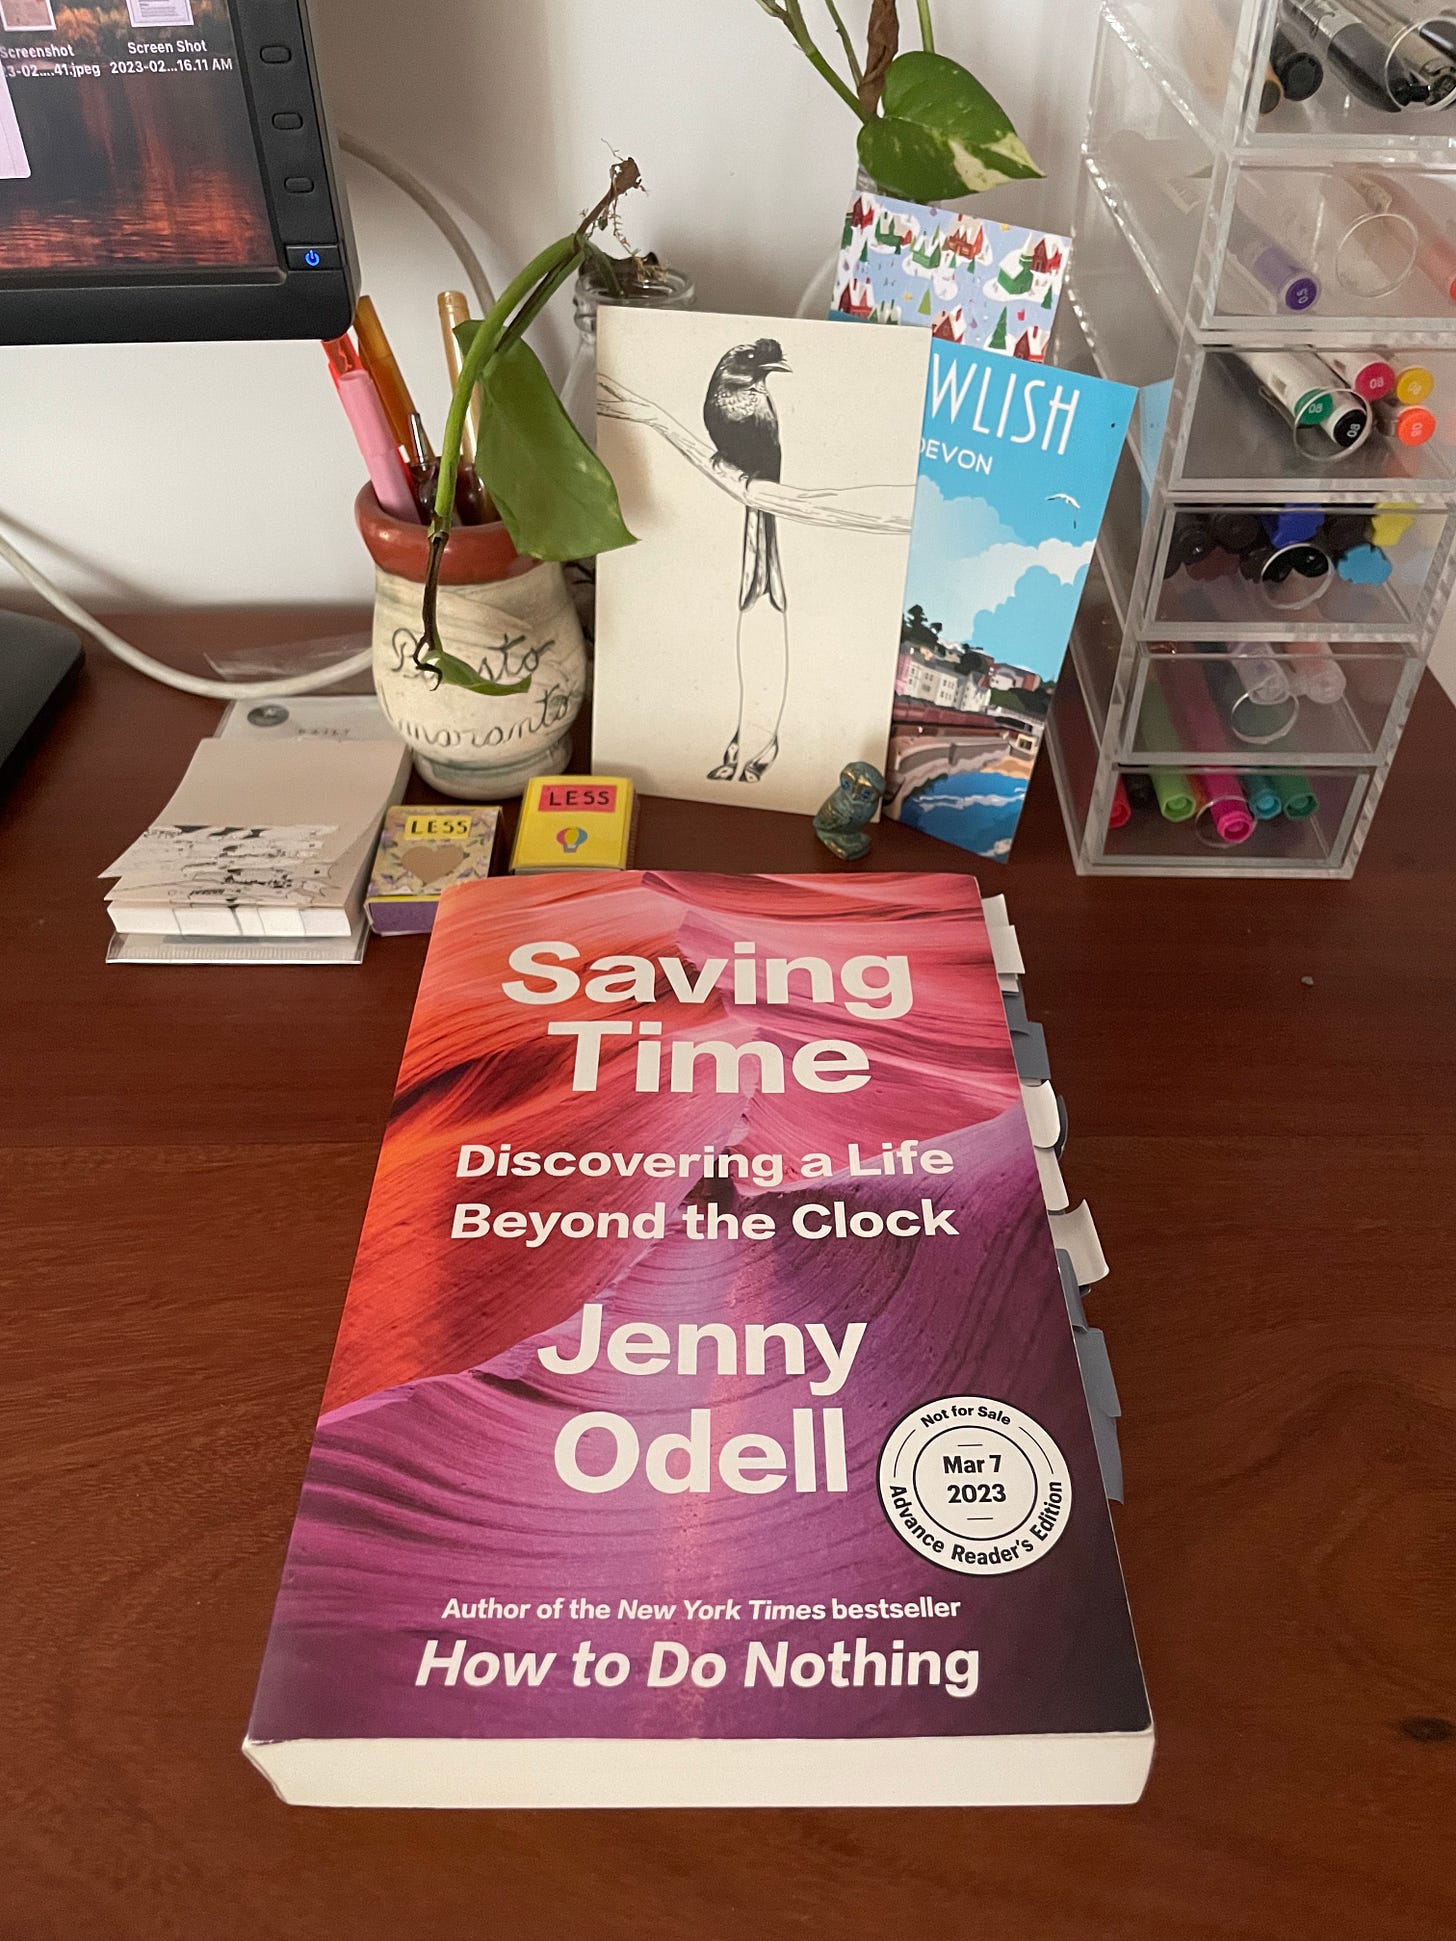 among stationery, poscards and plants, sits a book with post its stuck throughout. the title reads: saving time: discovering a life beyond the clock. jenny odell. author of the new york times bestseller how to do nothing. advance reasers edition, mar 7 2023